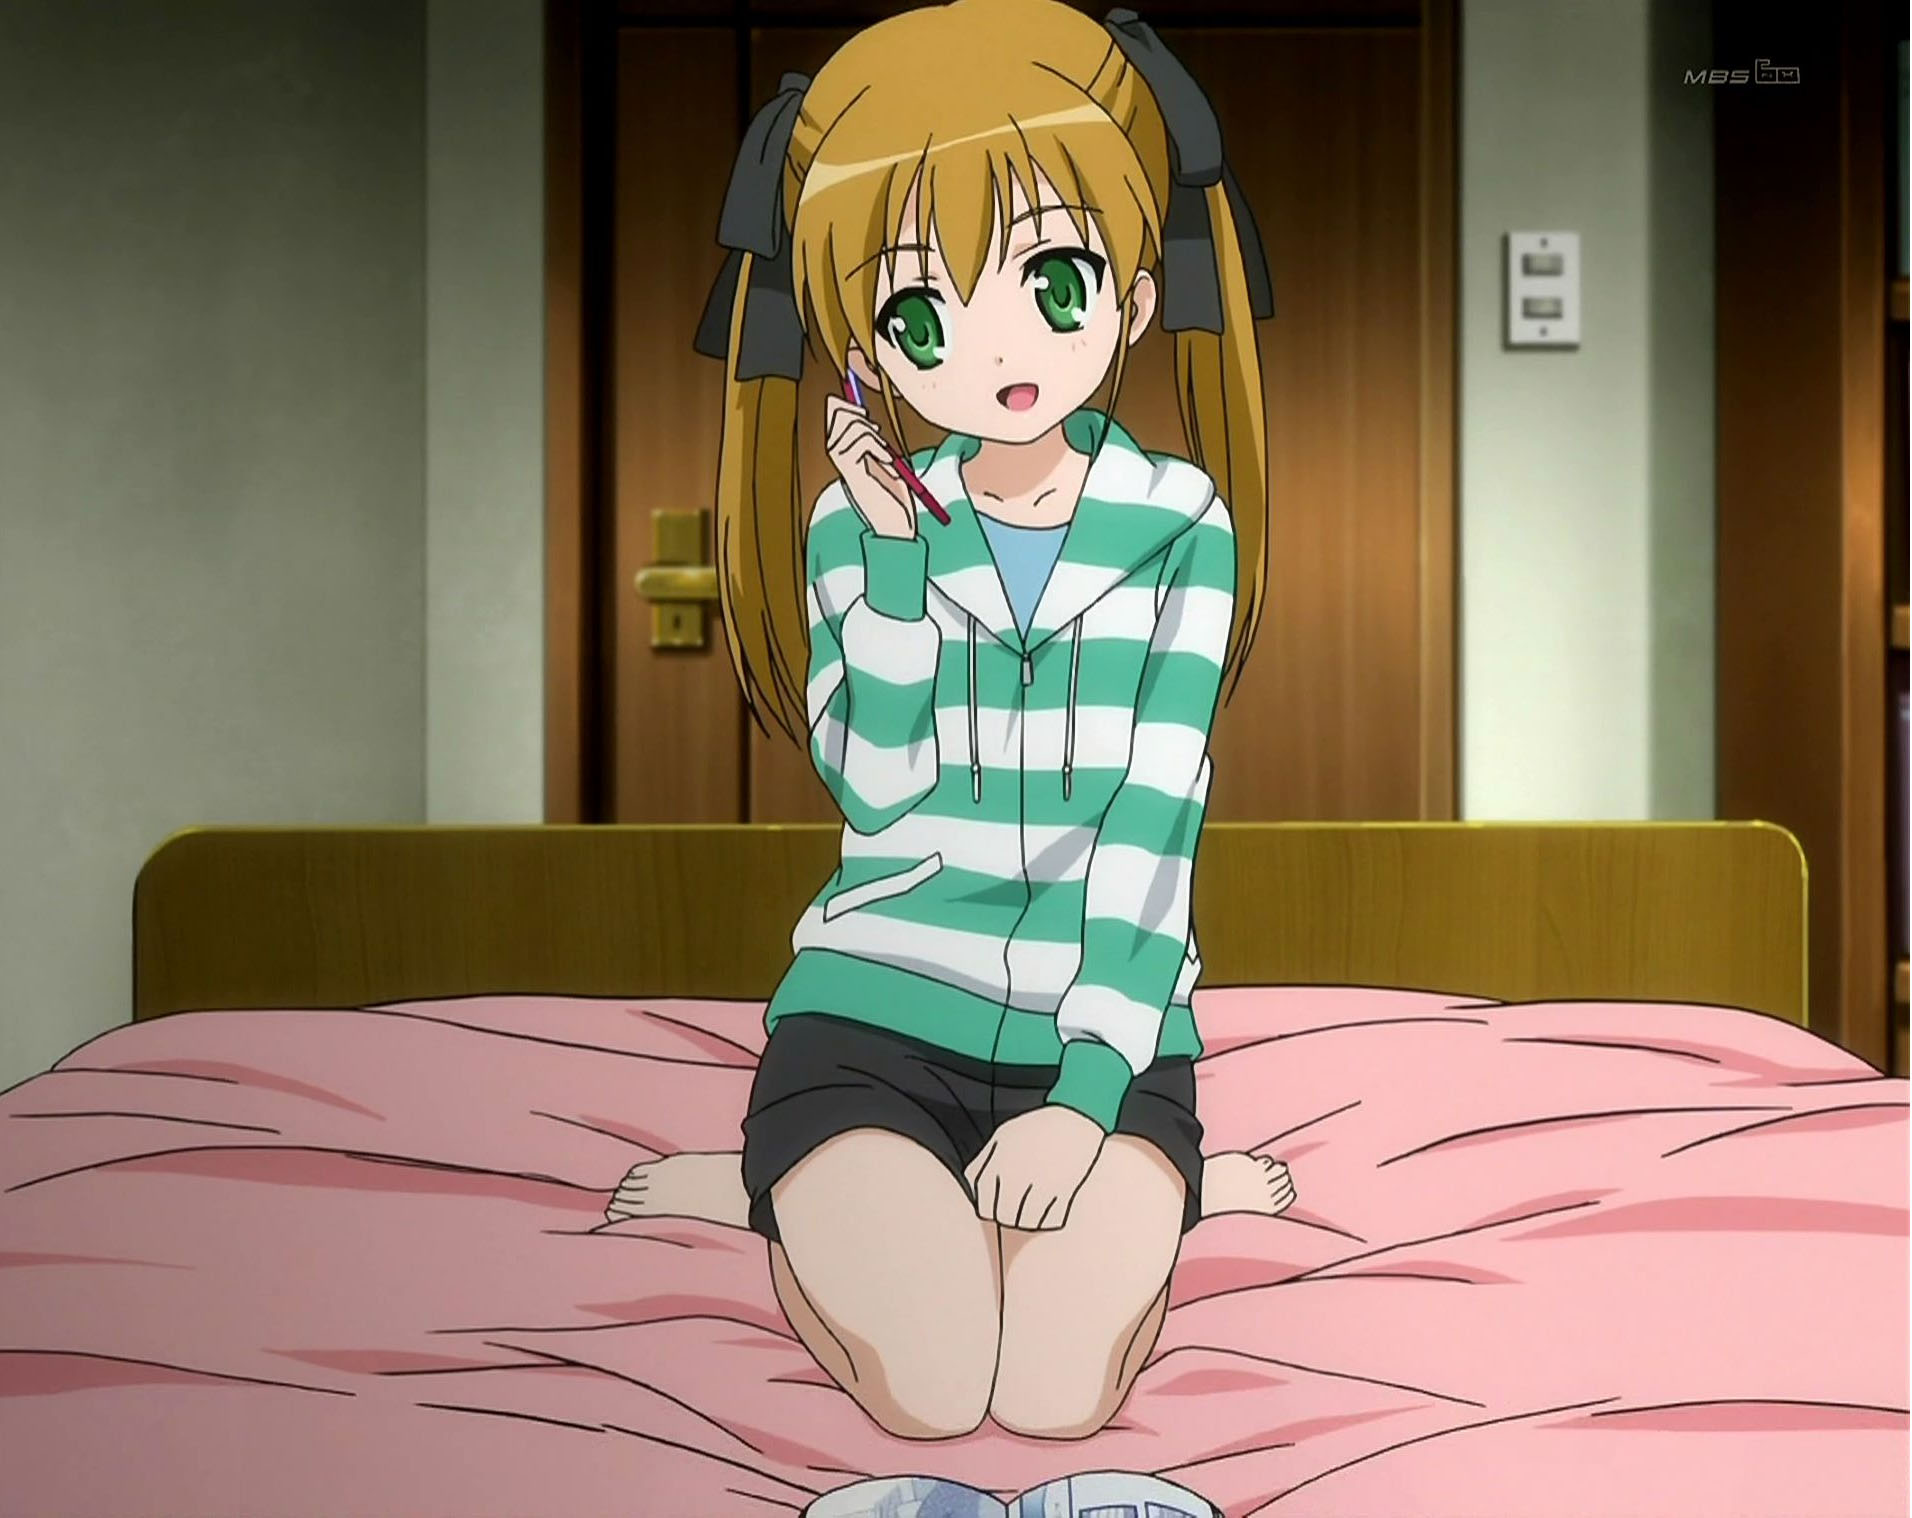 Rebecca Anderson from Dog Days